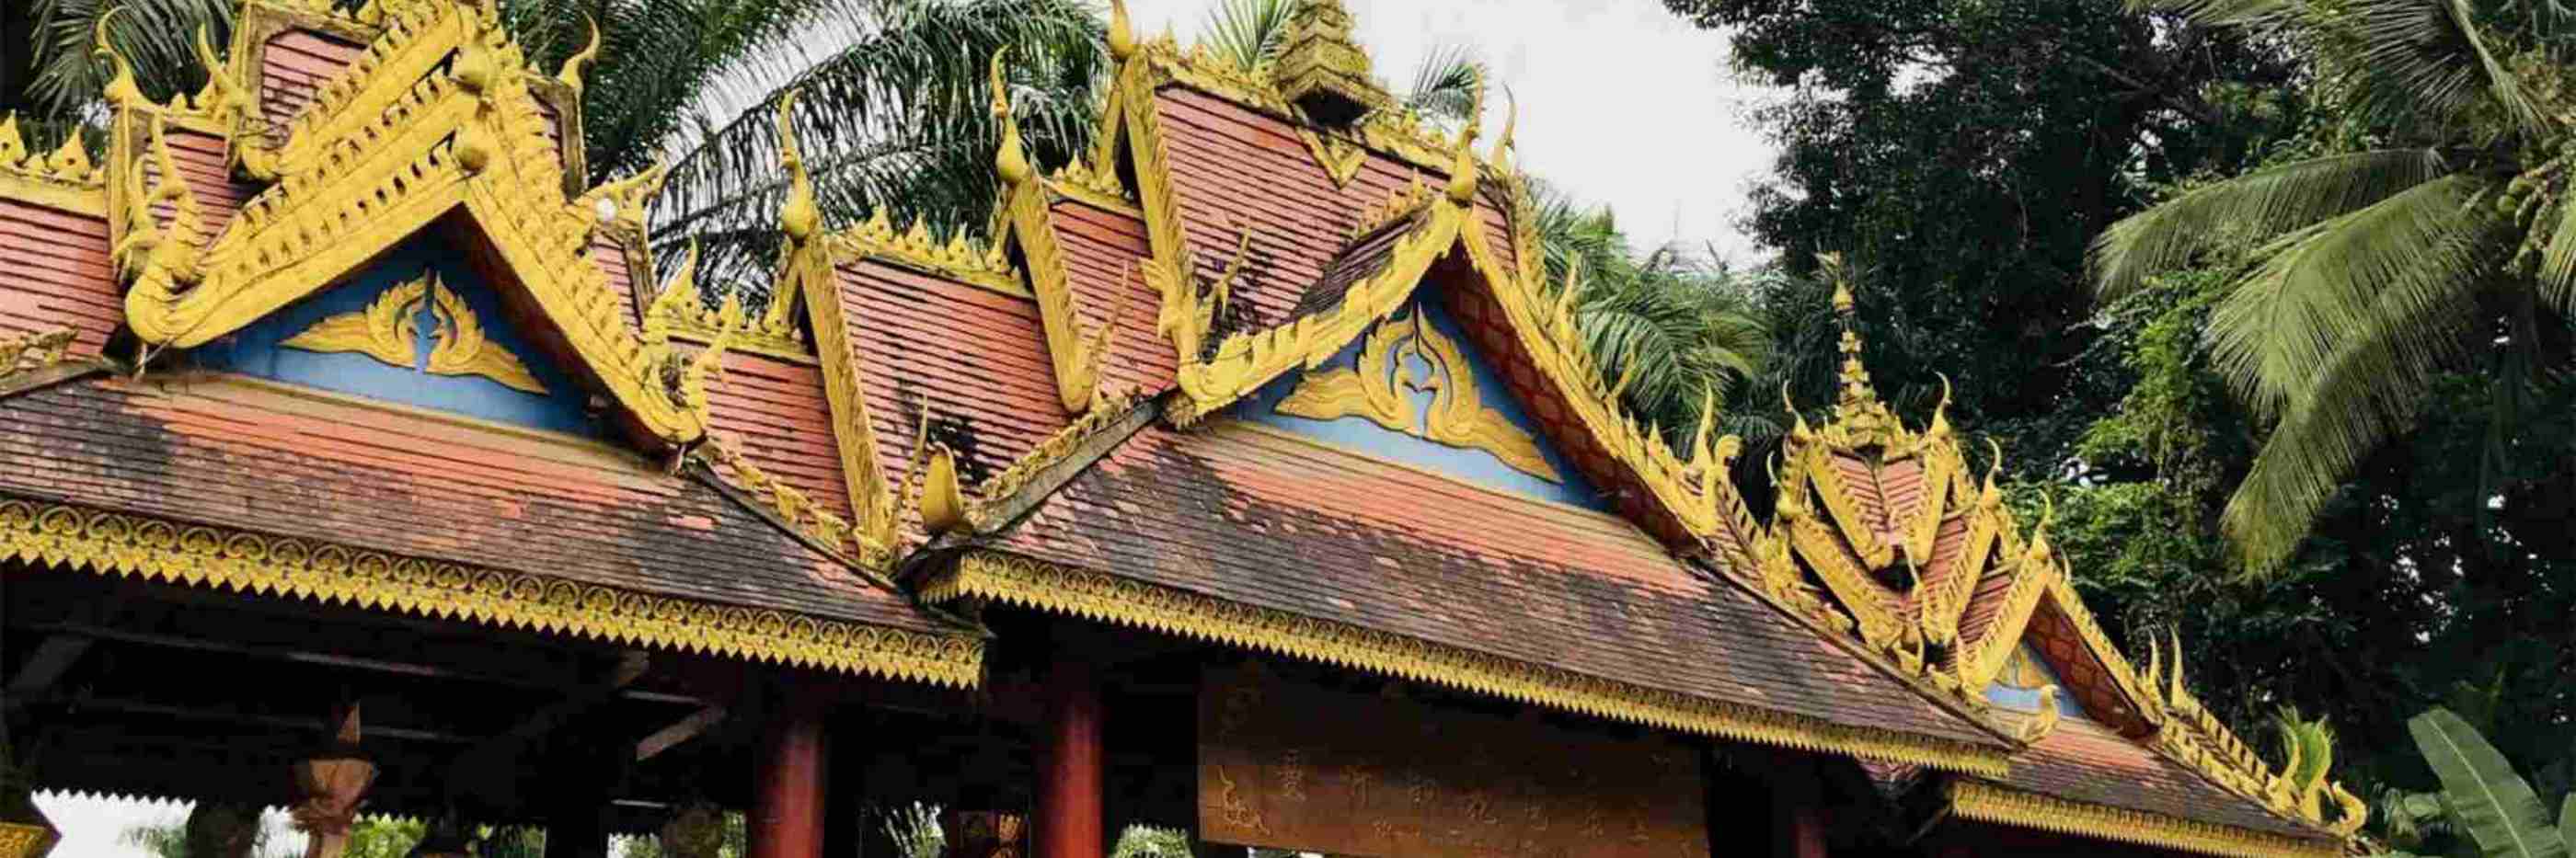 Xishuangbanna Attractions